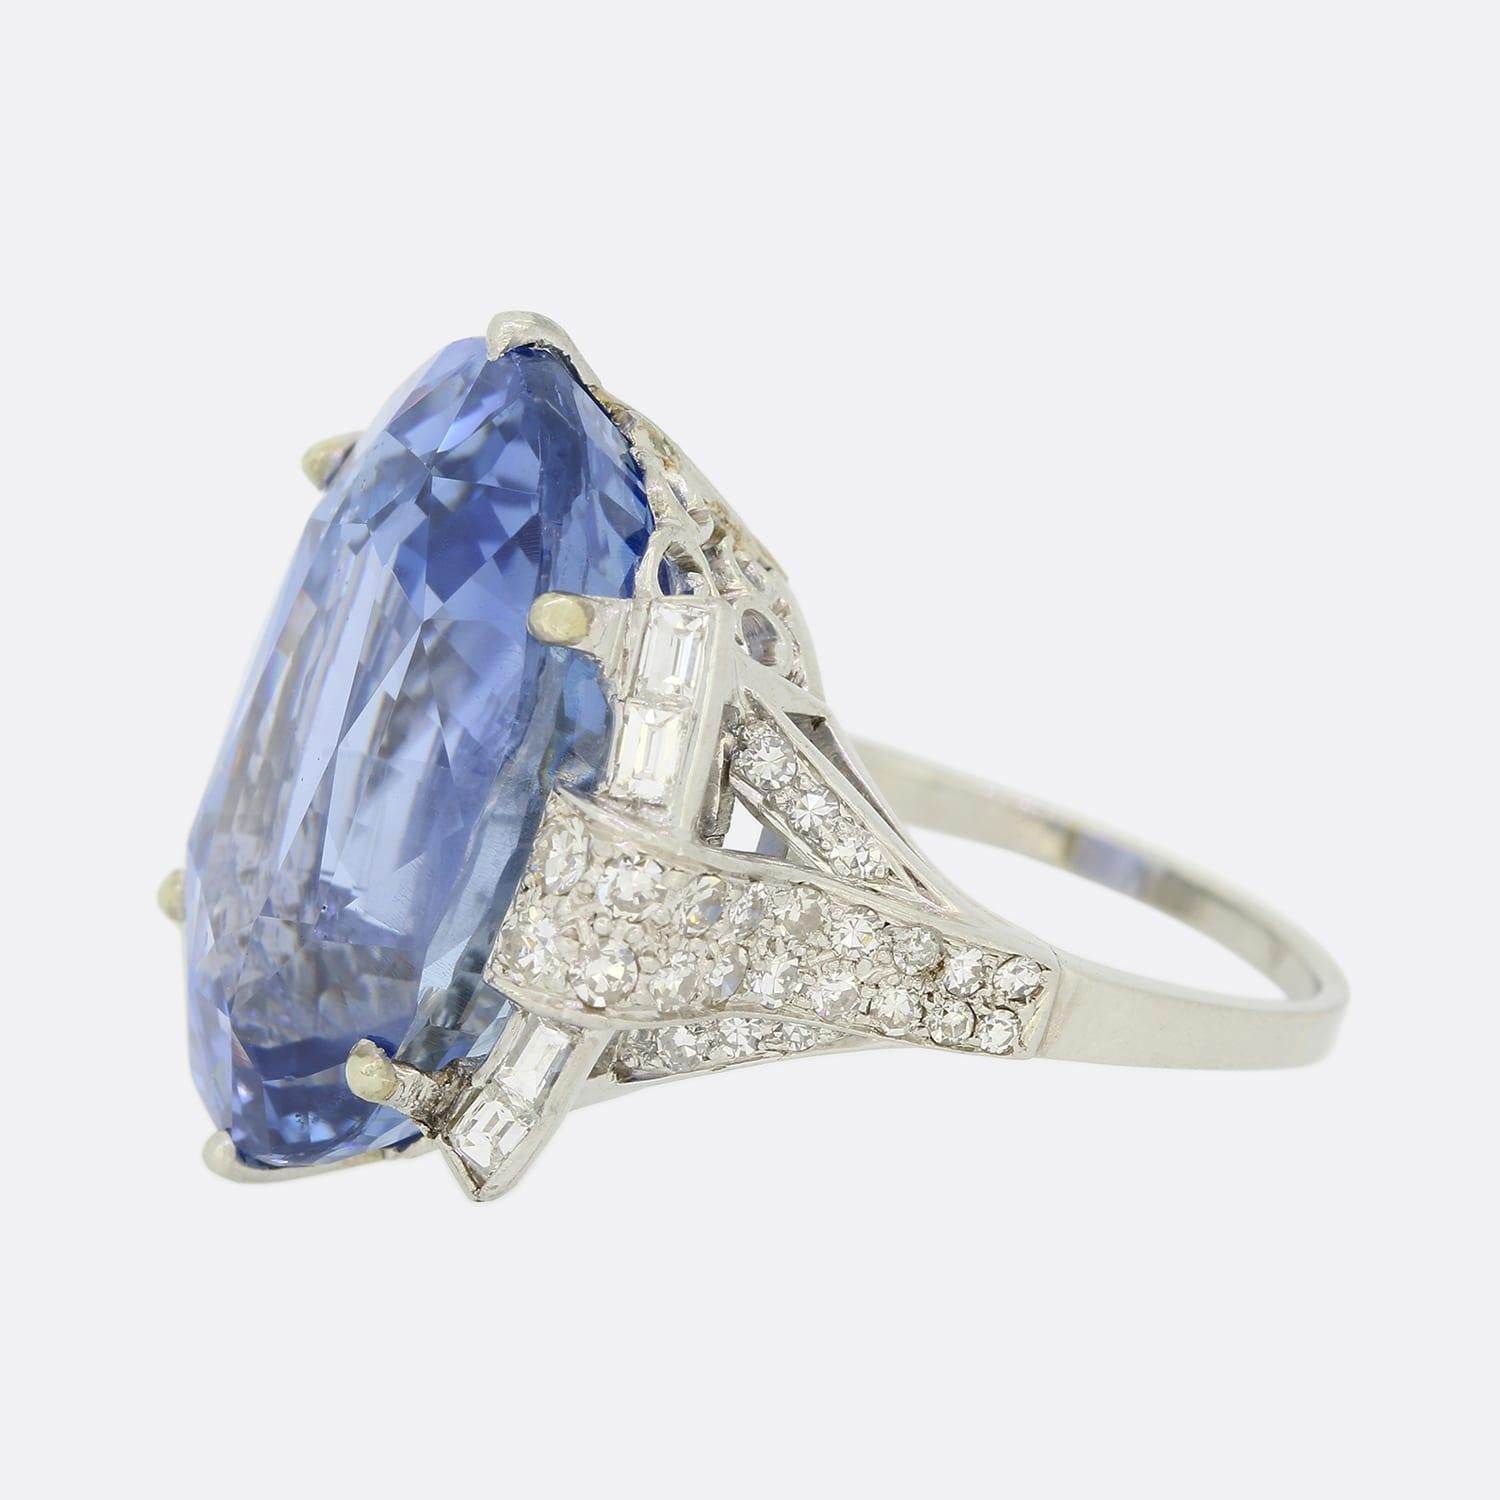 This is a wonderful sapphire and diamond ring from the 1950s period. The oval cut sapphire is untreated, of ceylon origin and a cornflower blue tone. It is a rare and impressive 26.93 carats and sits in a 6 clawed platinum mount. Each shoulder has